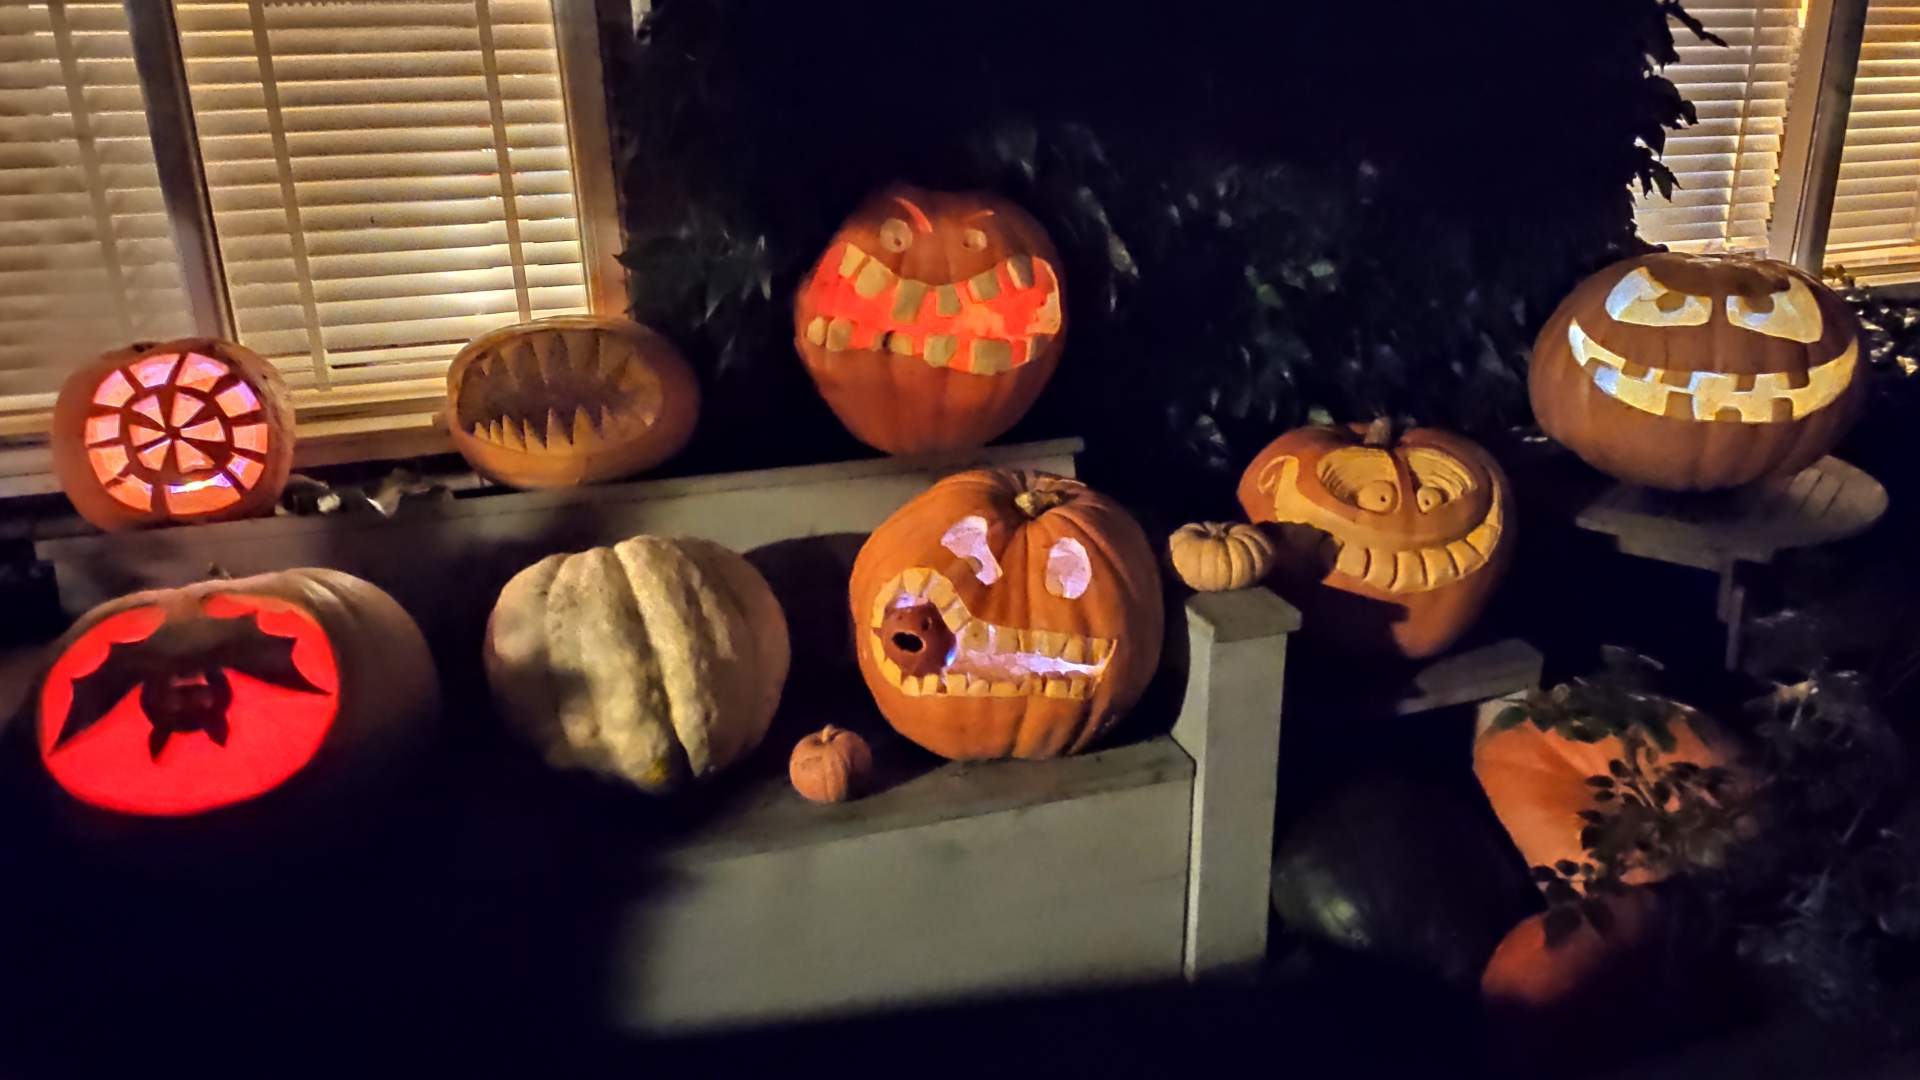 Pumpkins with lights are the perfect decoration for Halloween